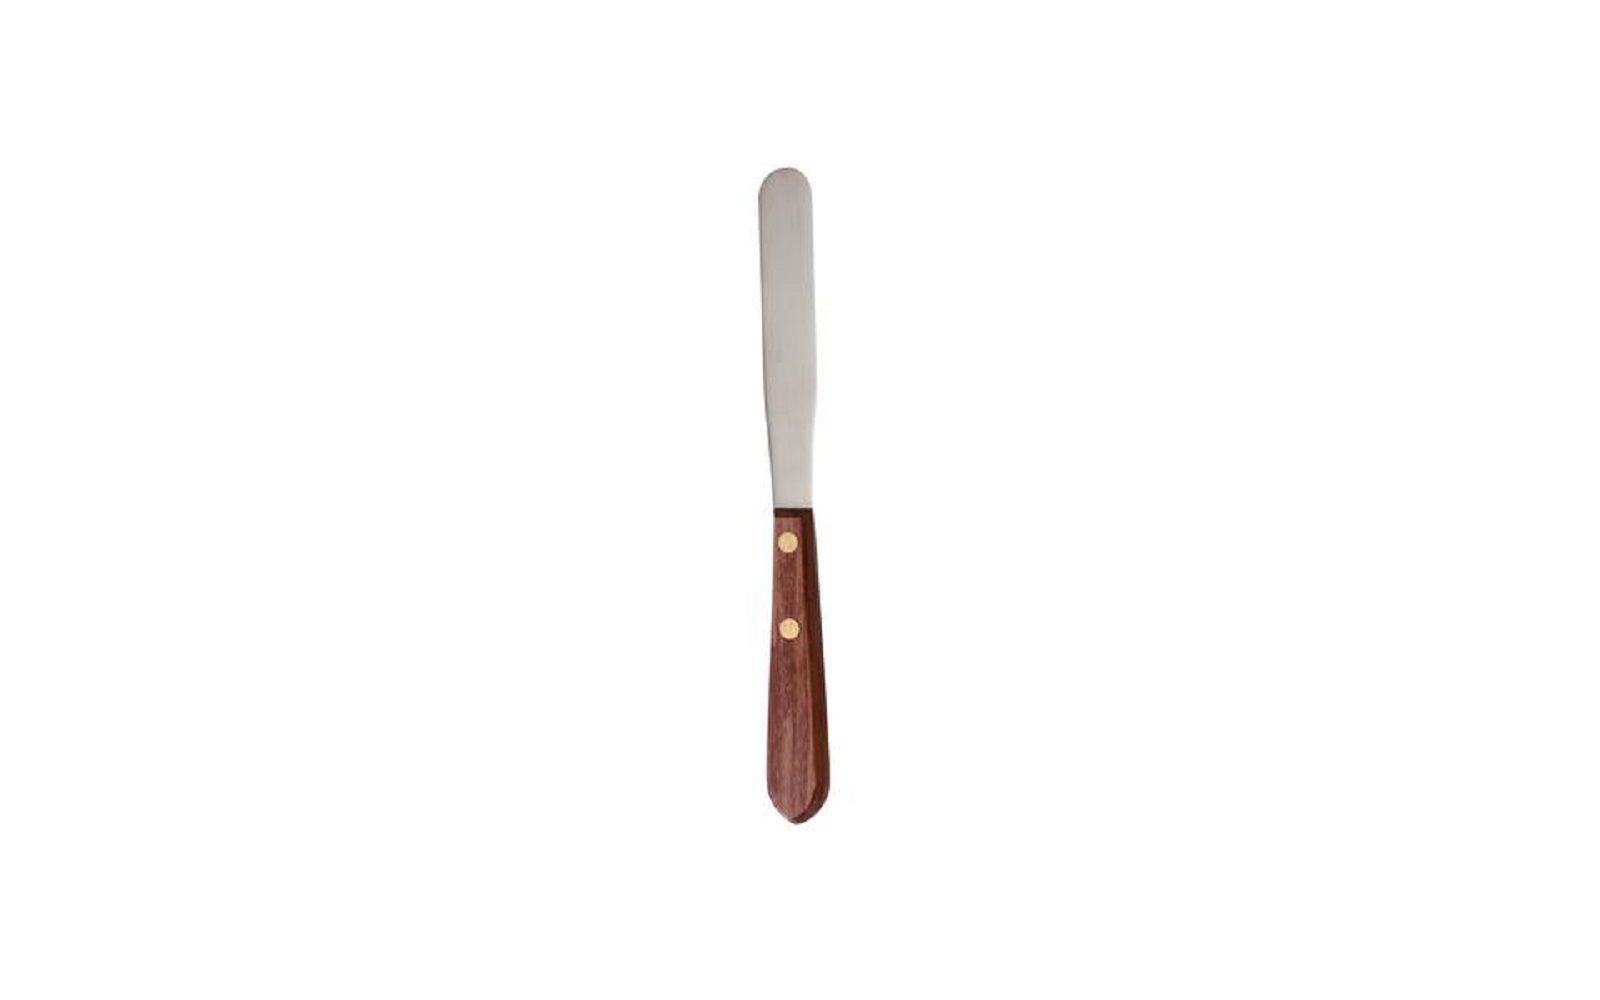 Patterson® plaster spatula with stainless steel blade - no. 2r, flexible